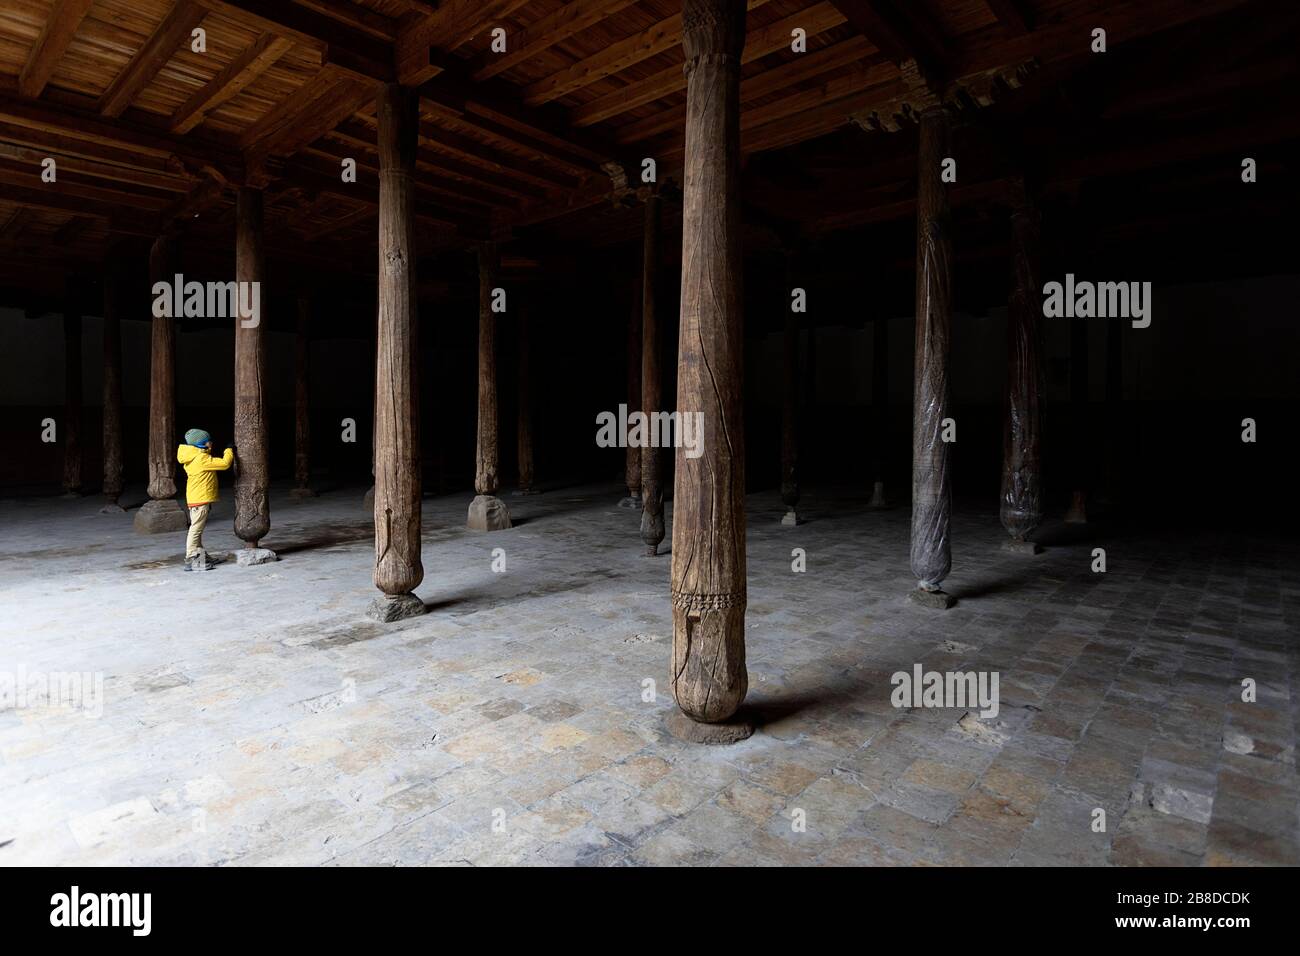 Uzbekistan, Khiva, boy in yellow jacket looking at the carved detail of the wood columns inside the old Juma mosque Stock Photo